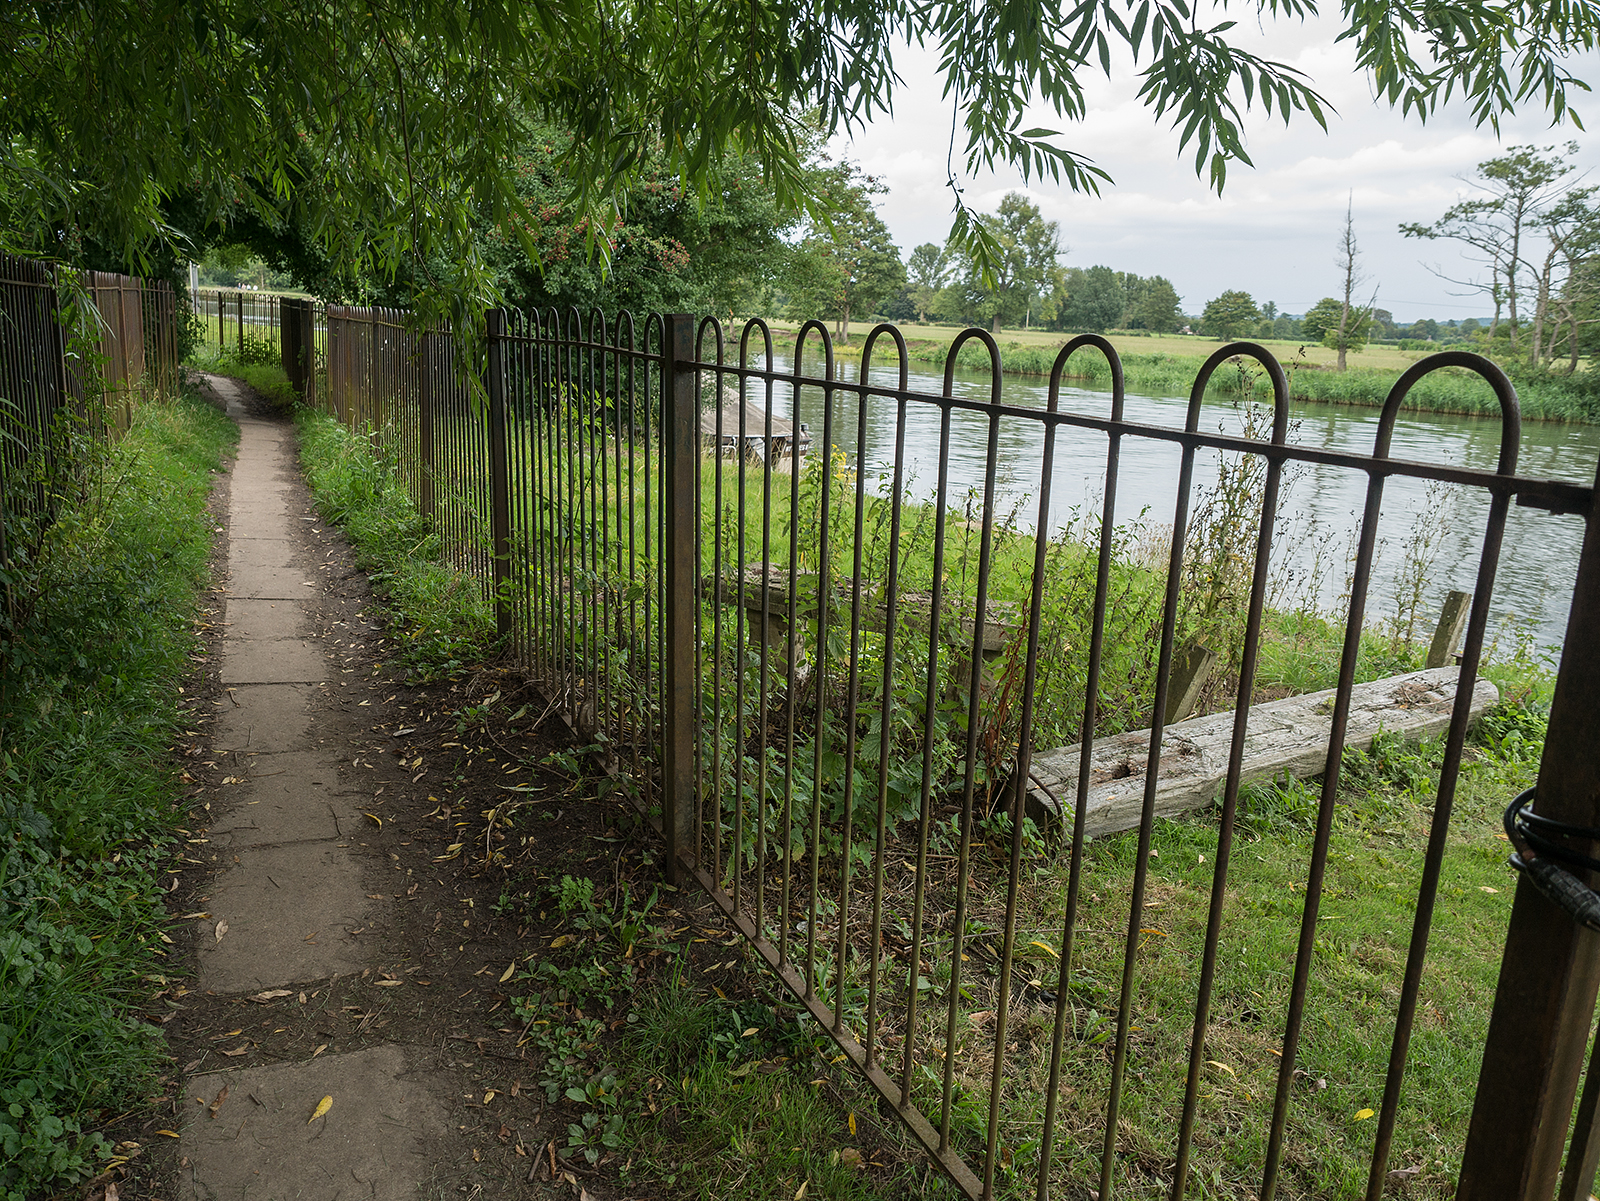 More private riverside areas in Wallingford